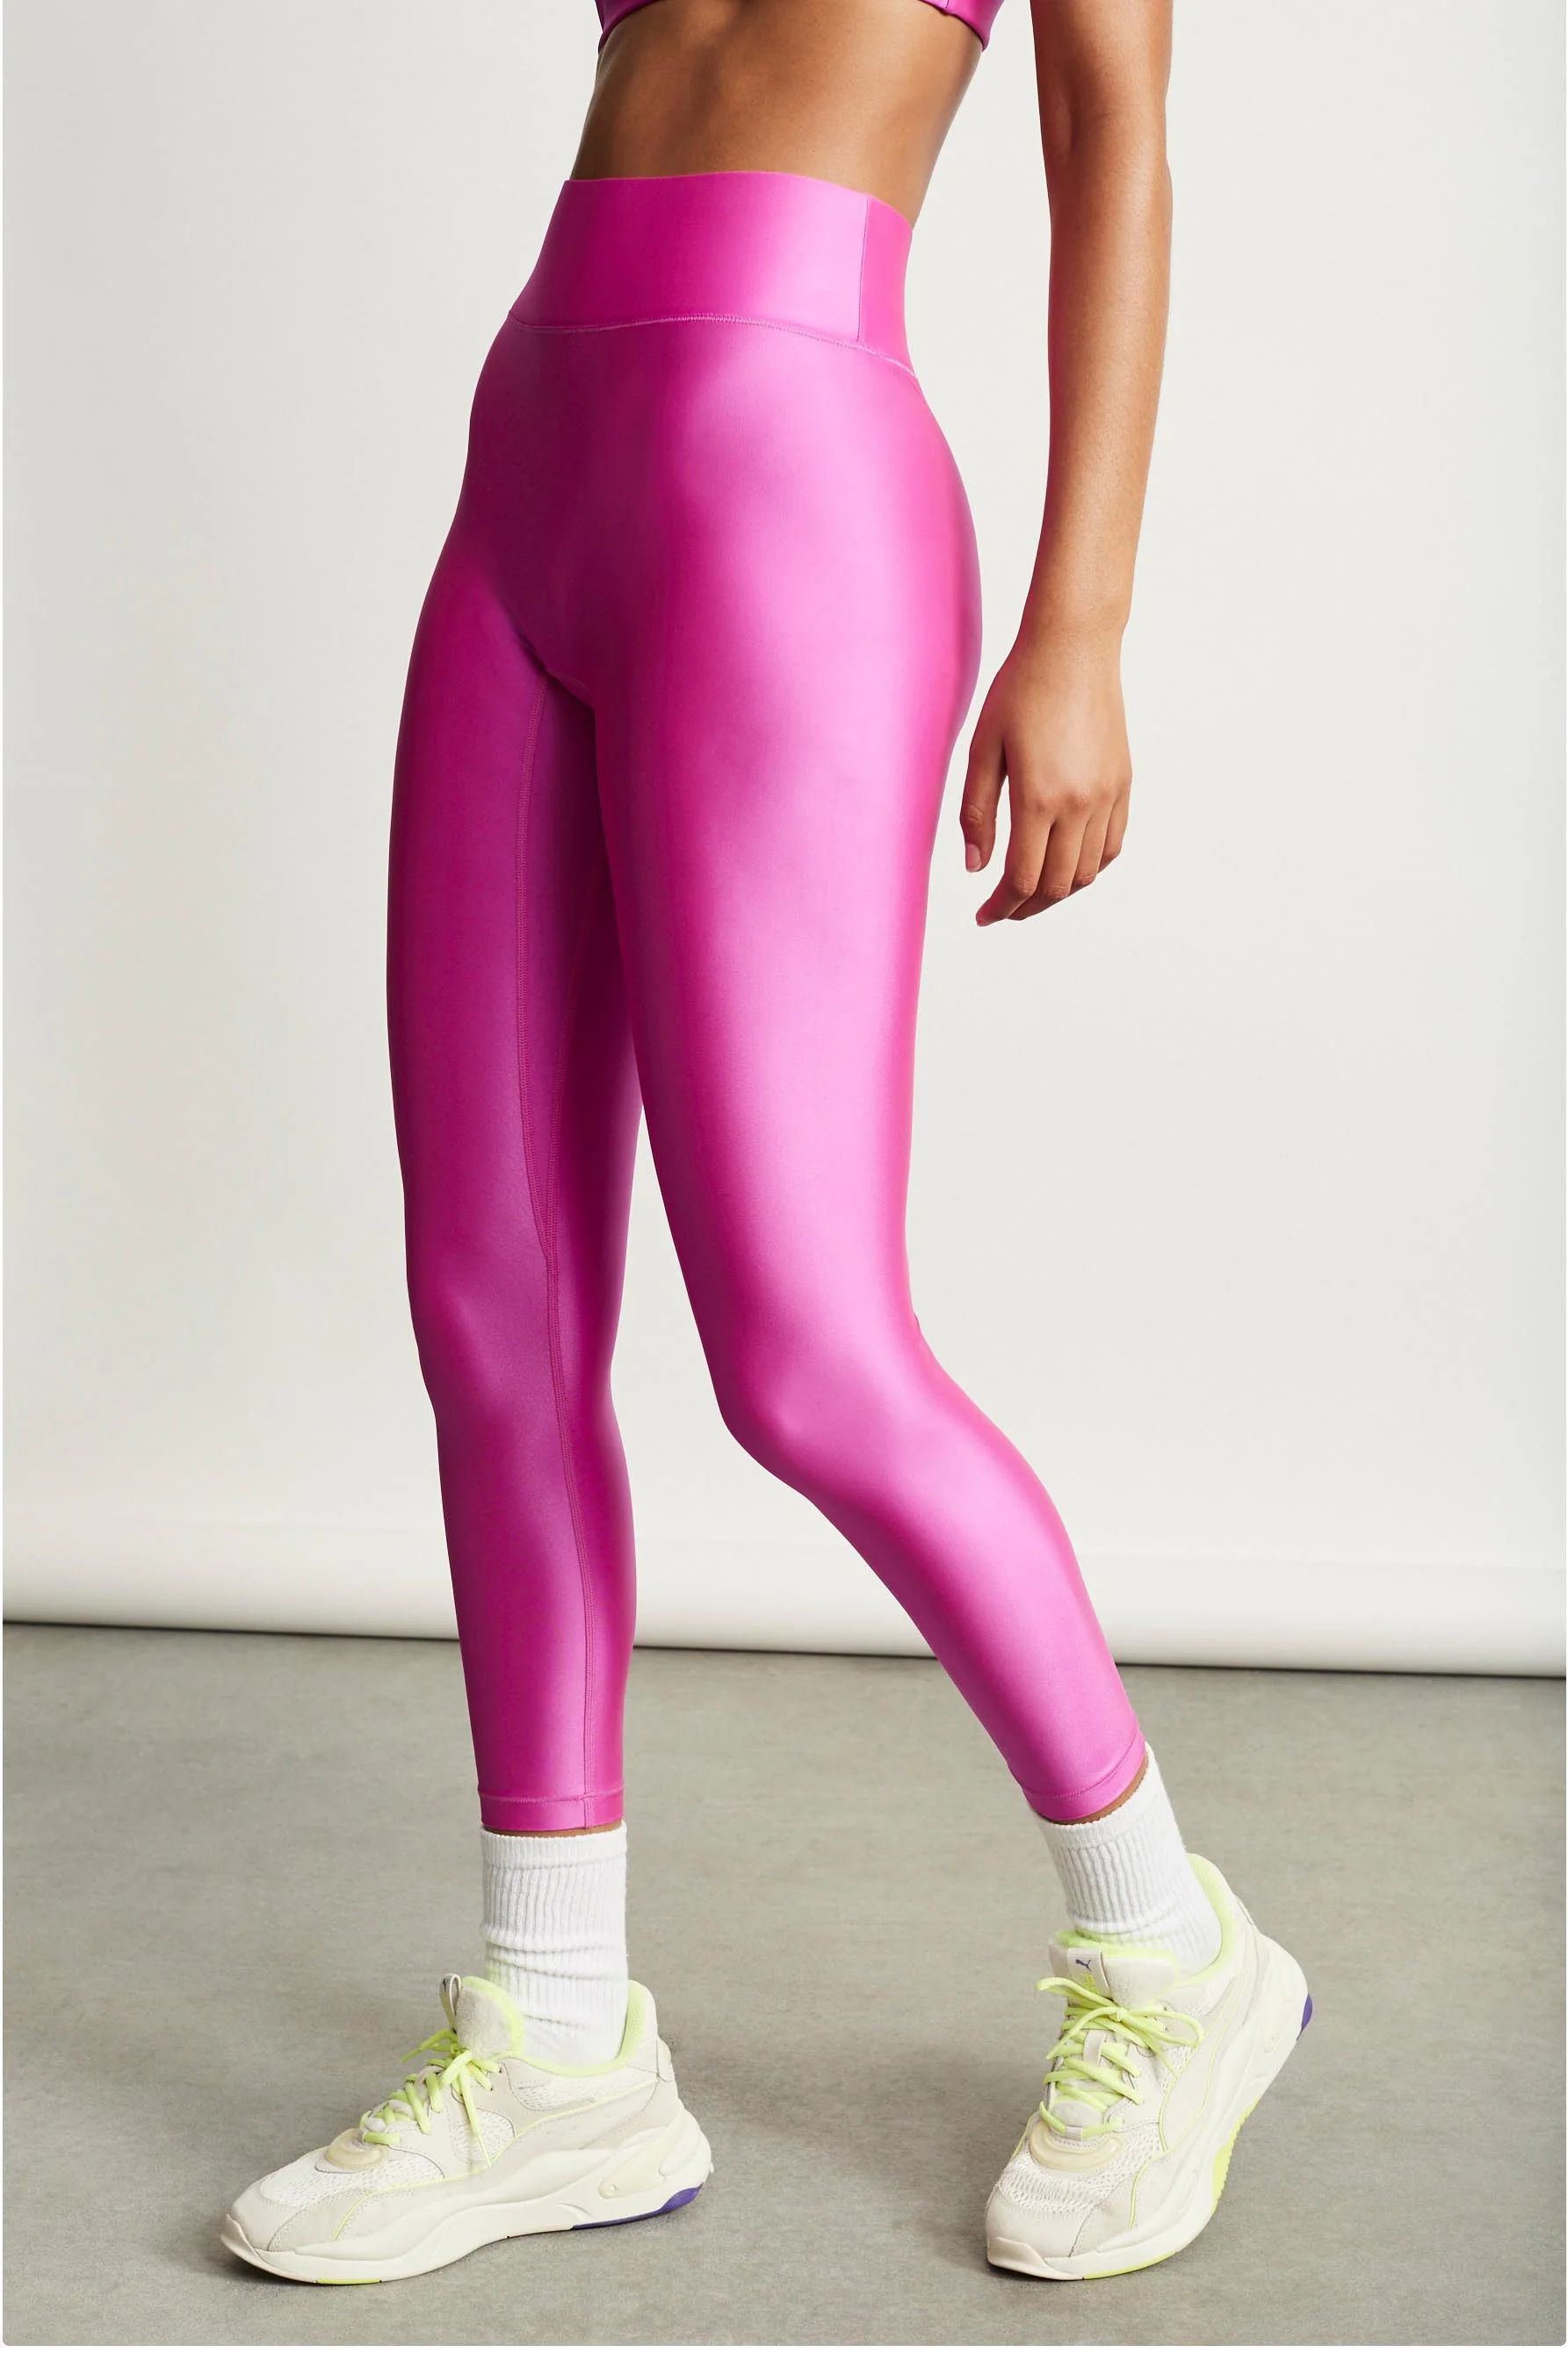 All Access Center Stage Leggings in Electric Pink Bandier | Bandier